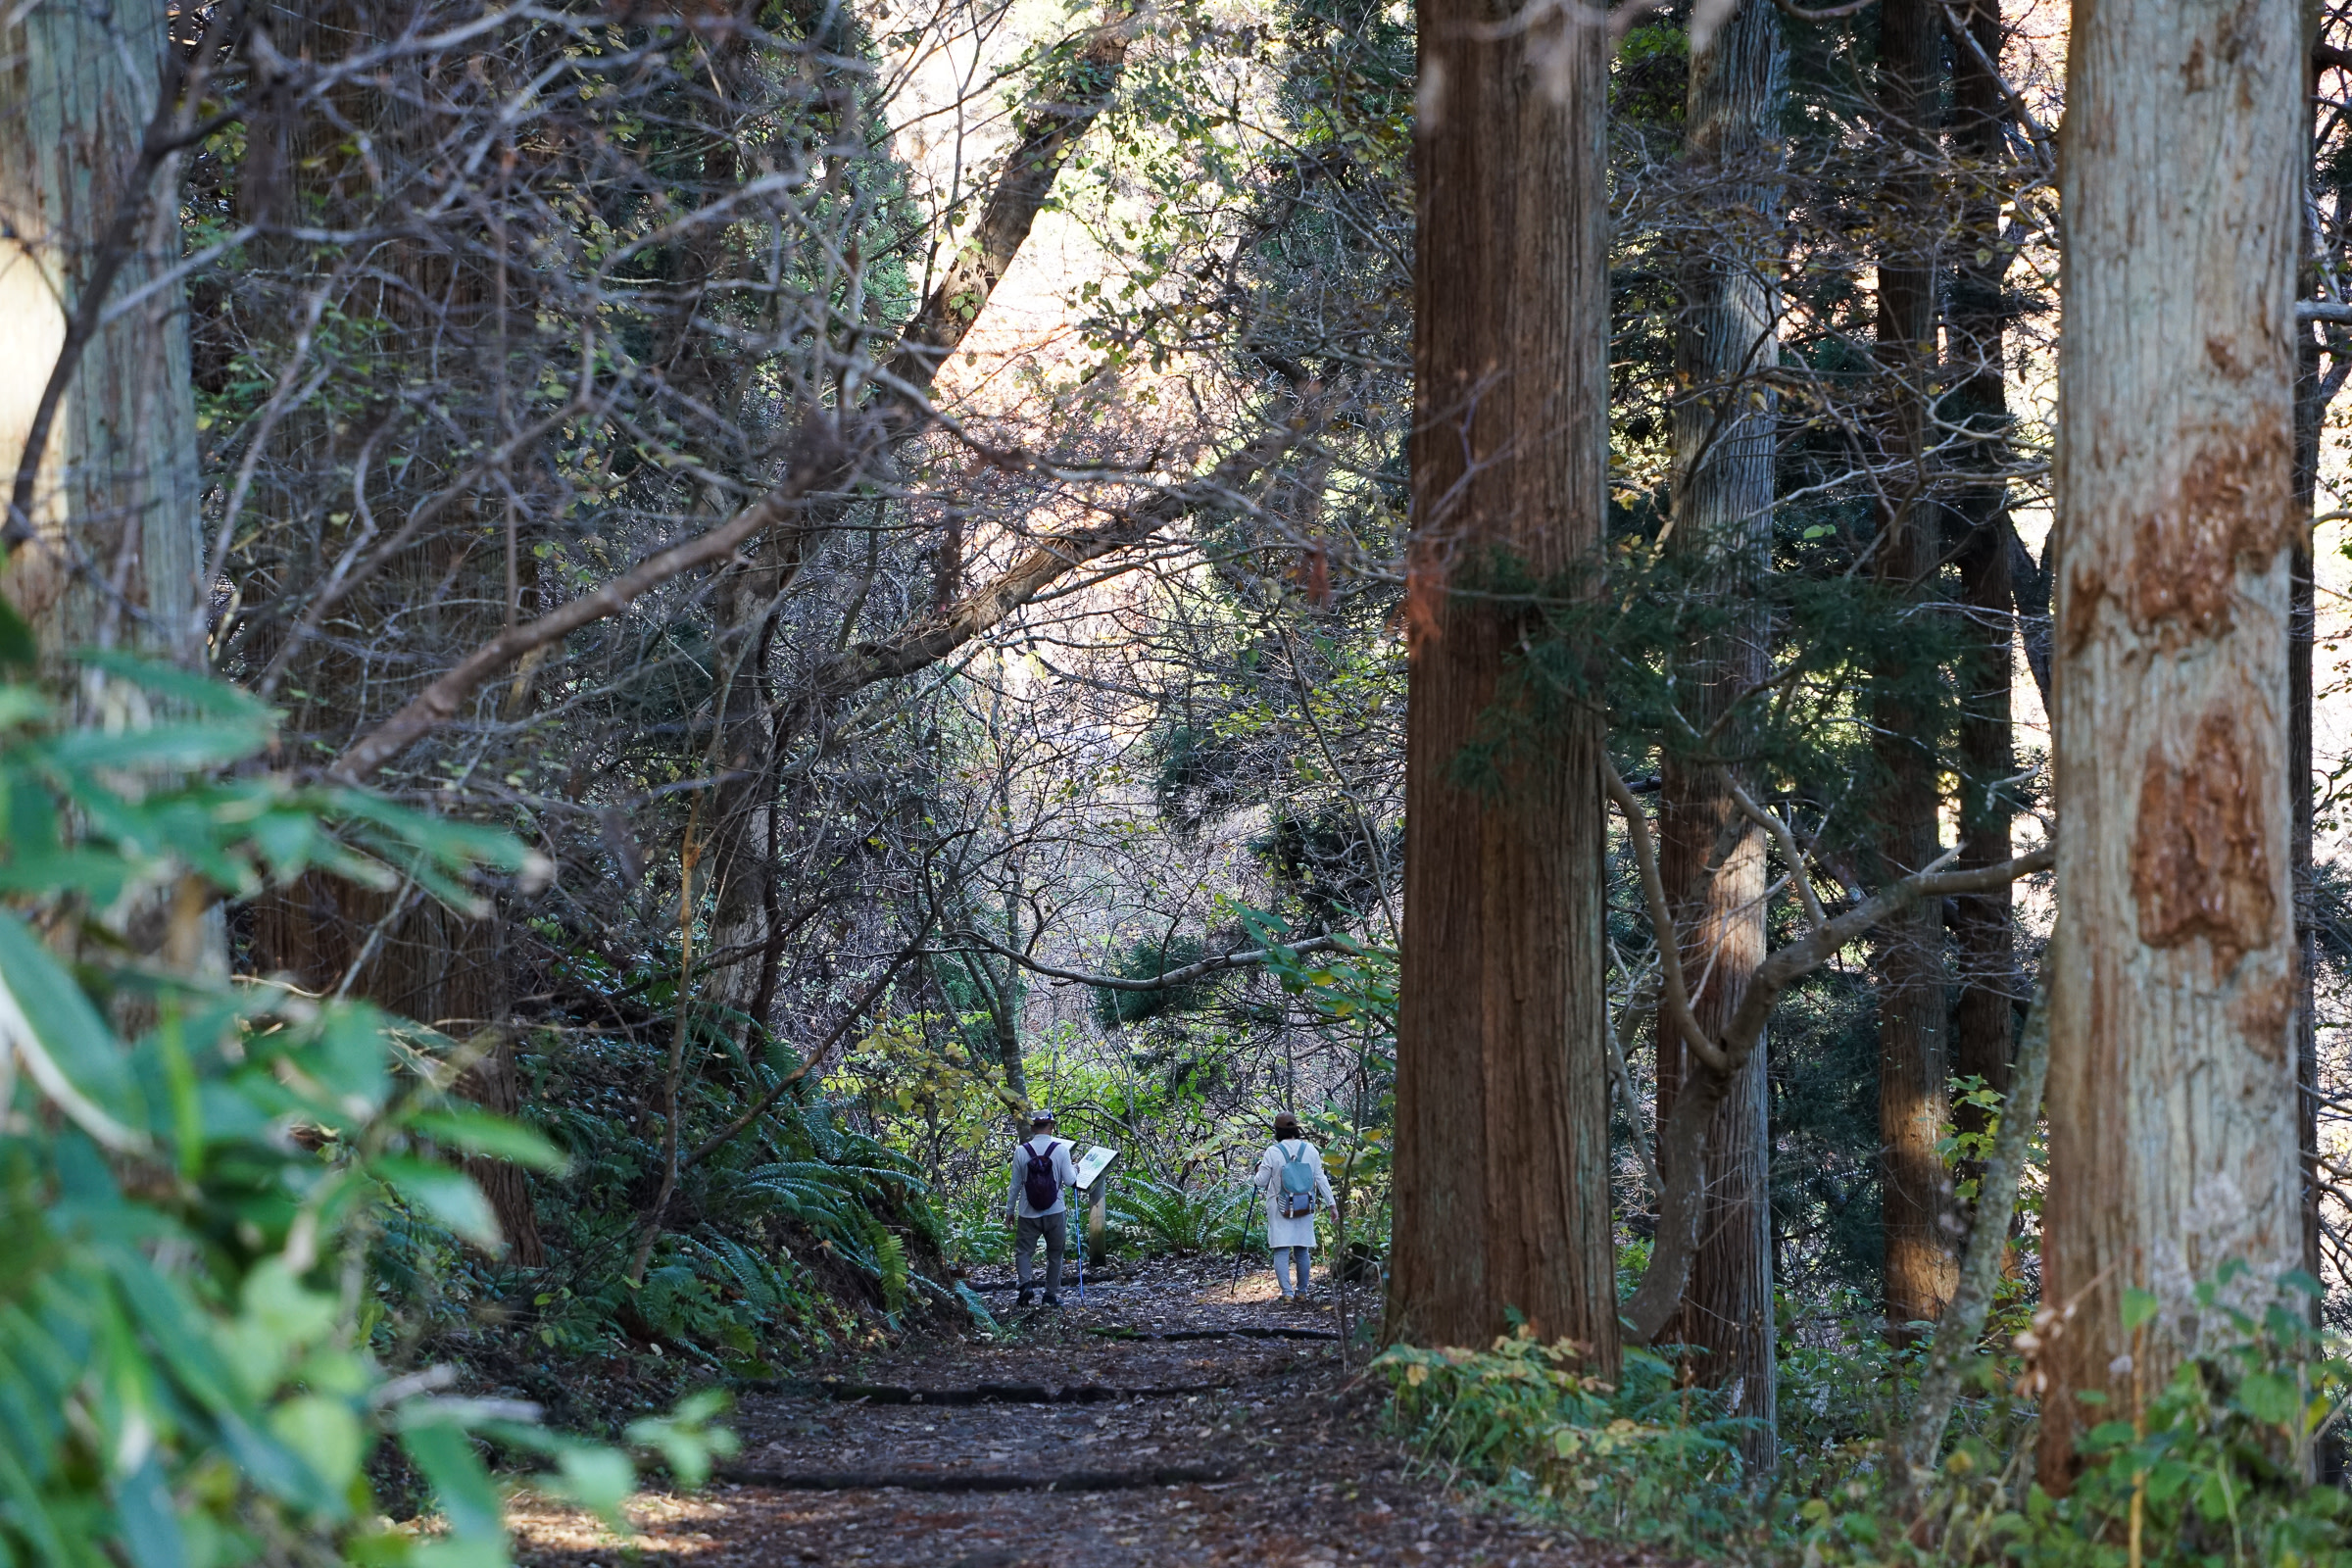 Two hikers walk through a forest of tall cedar trees.